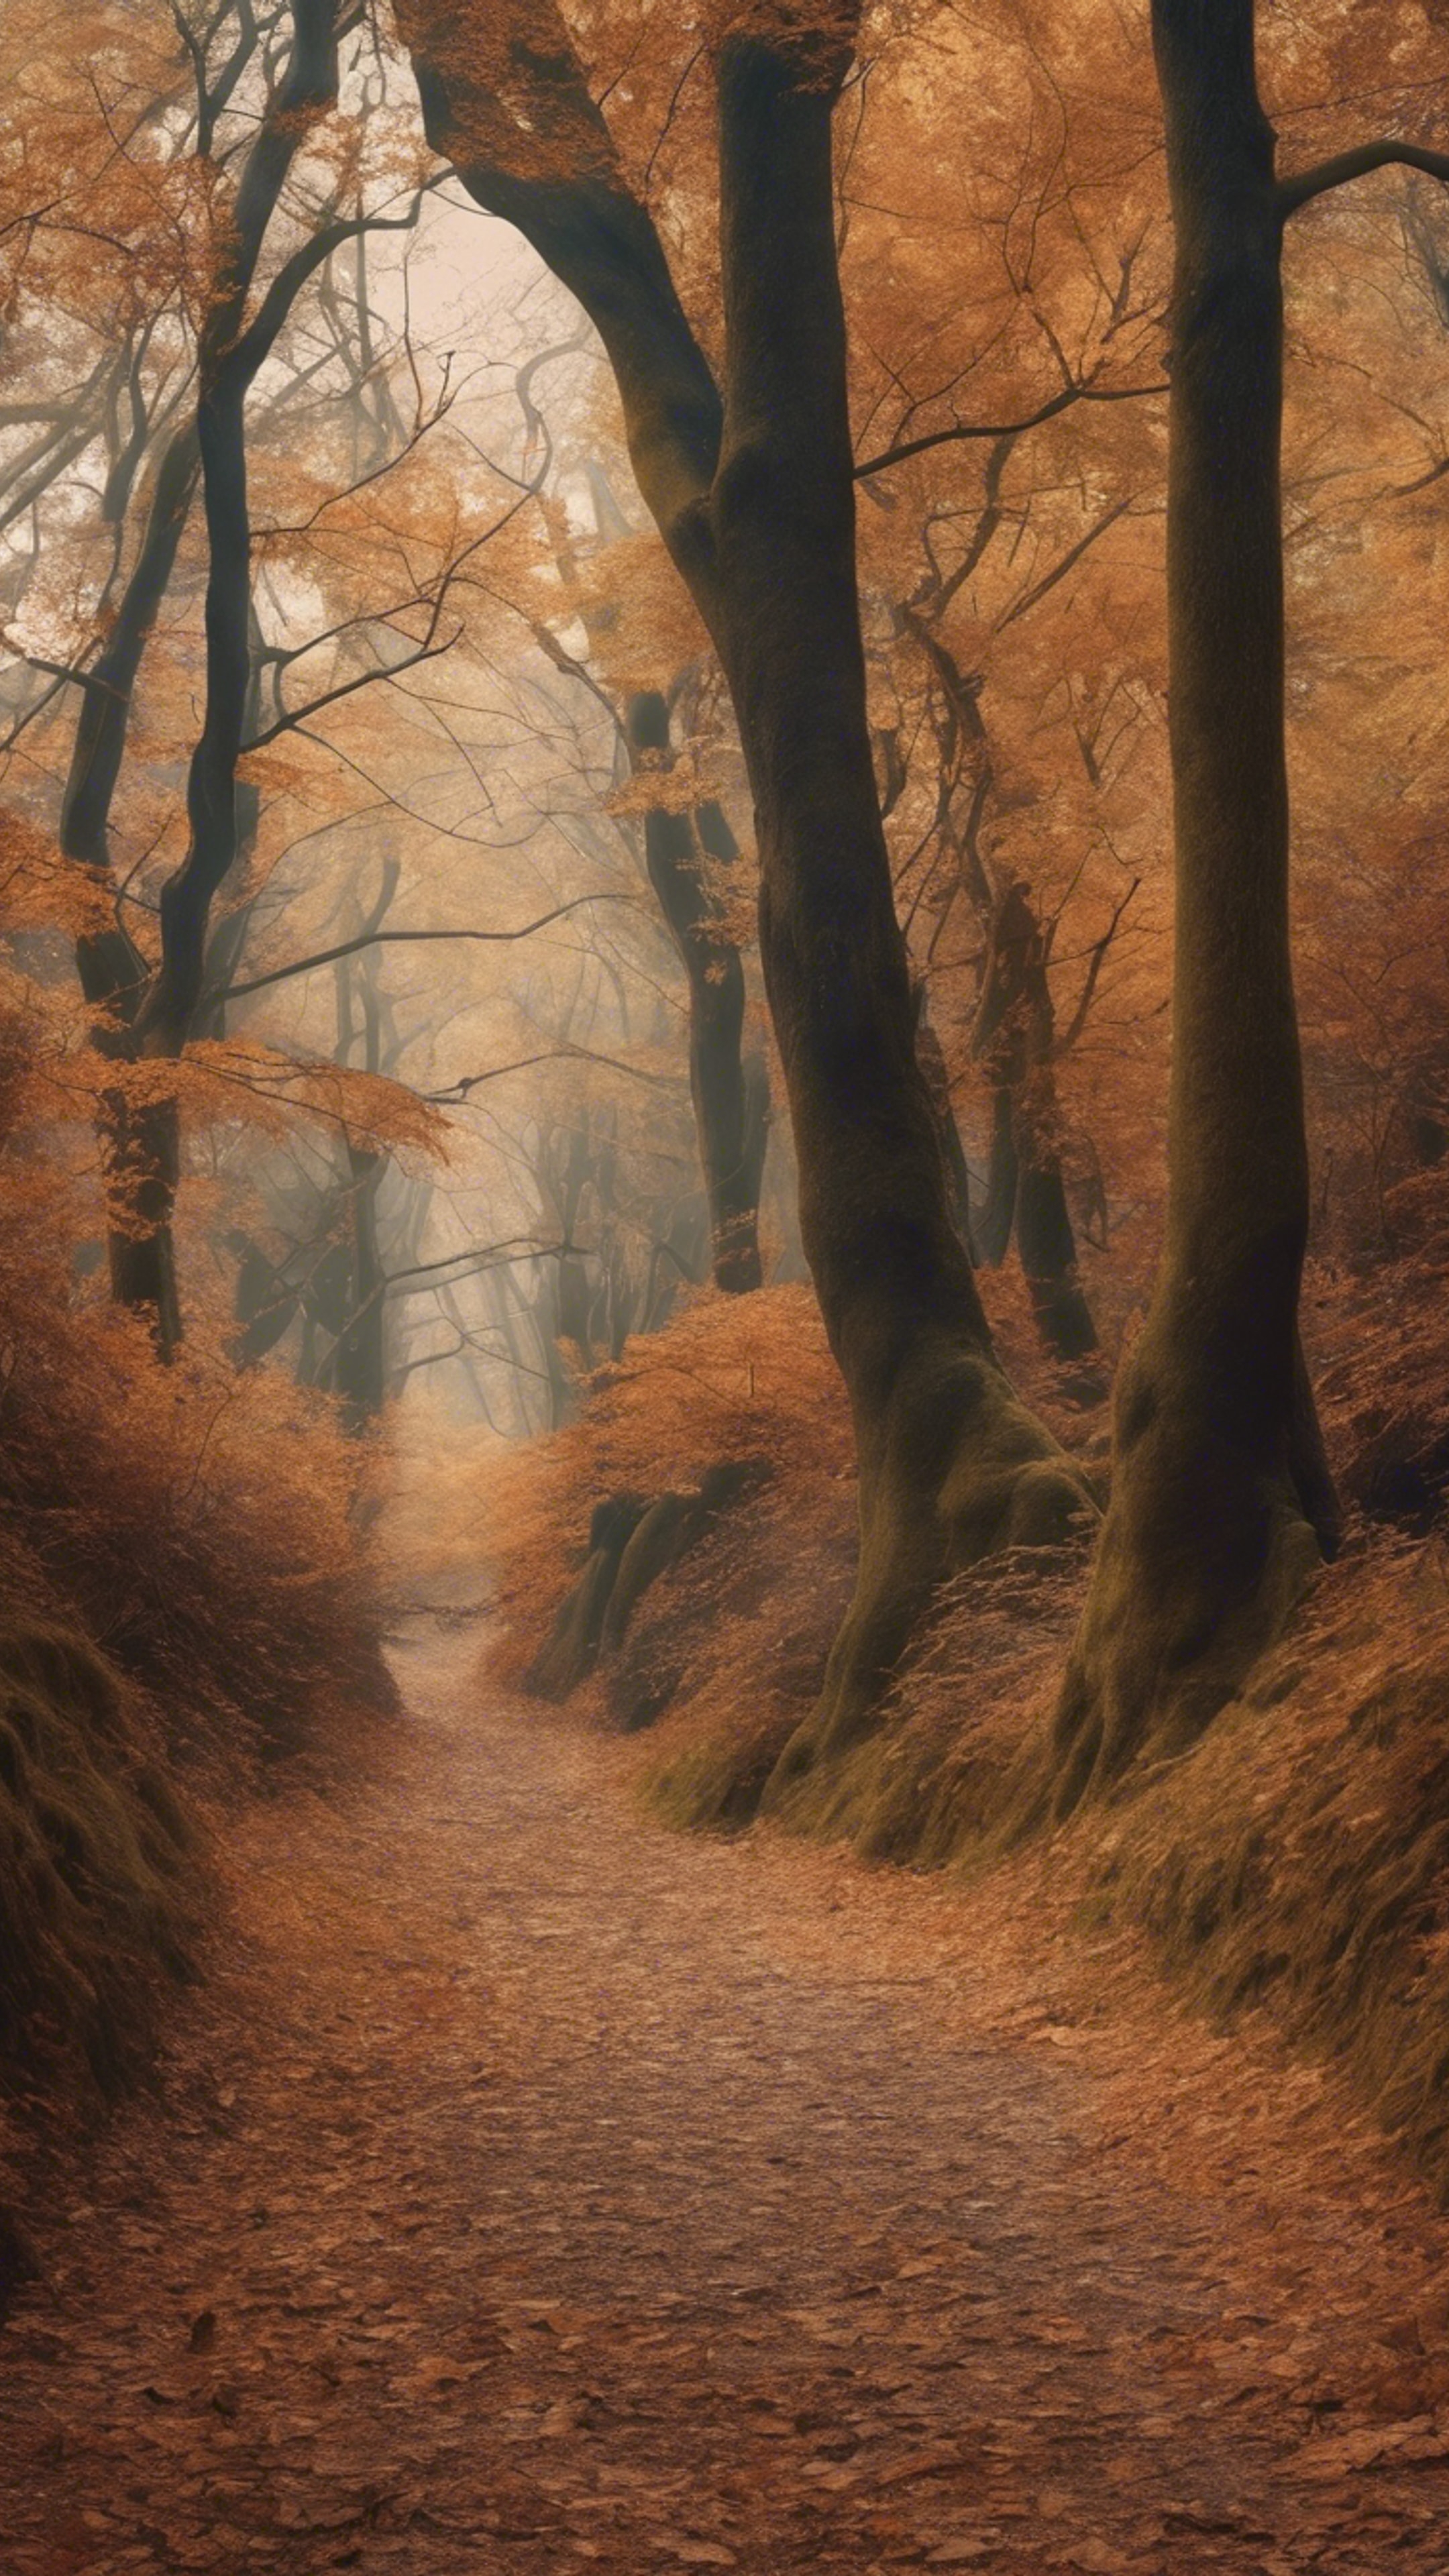 A mystic forest path covered in crunchy brown autumn leaves Wallpaper[44e03b30ee0343628942]